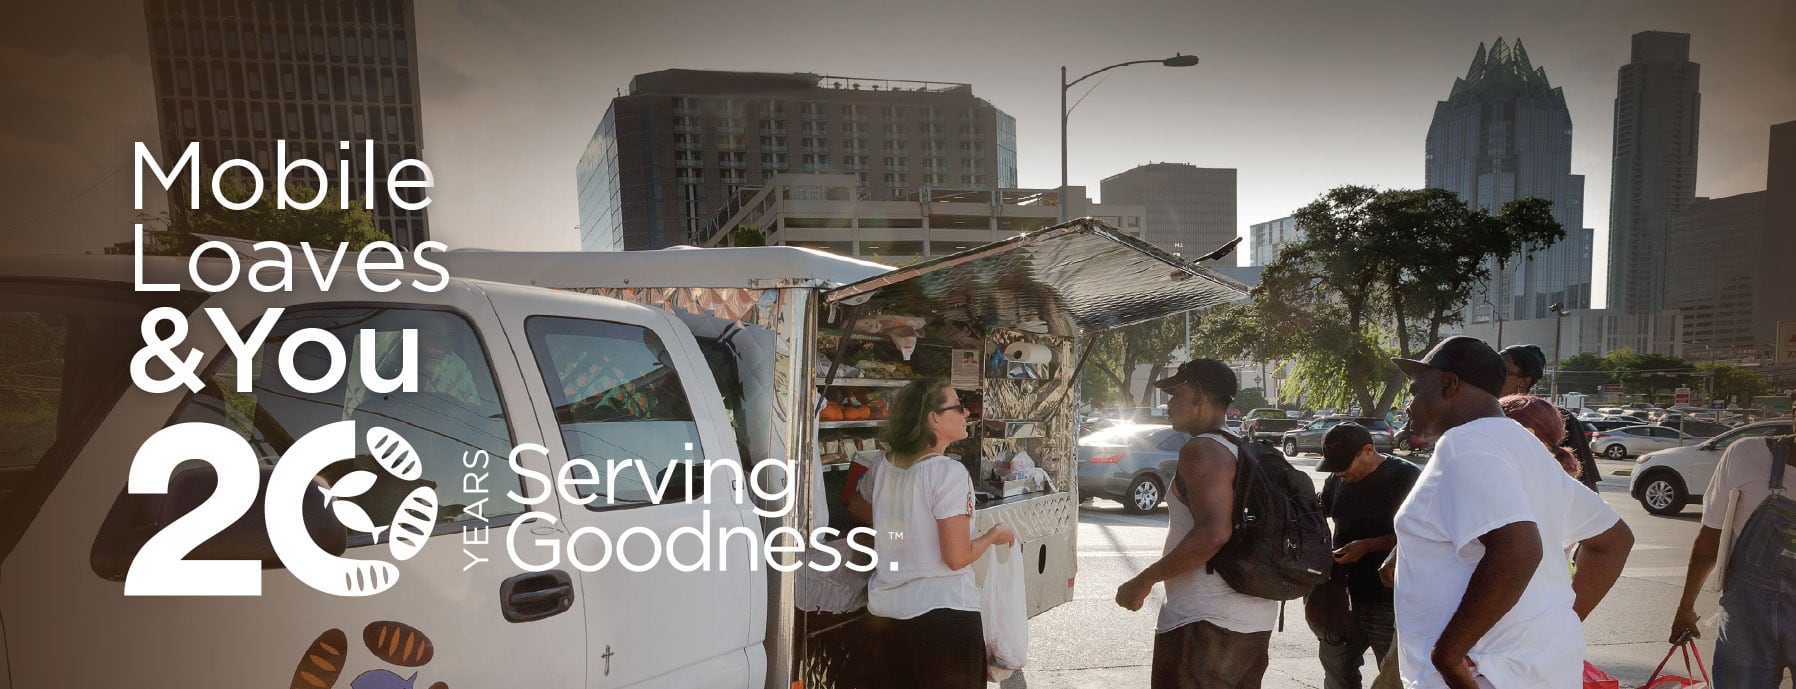 Mobile Loaves & You, 20 Years Serving Goodness